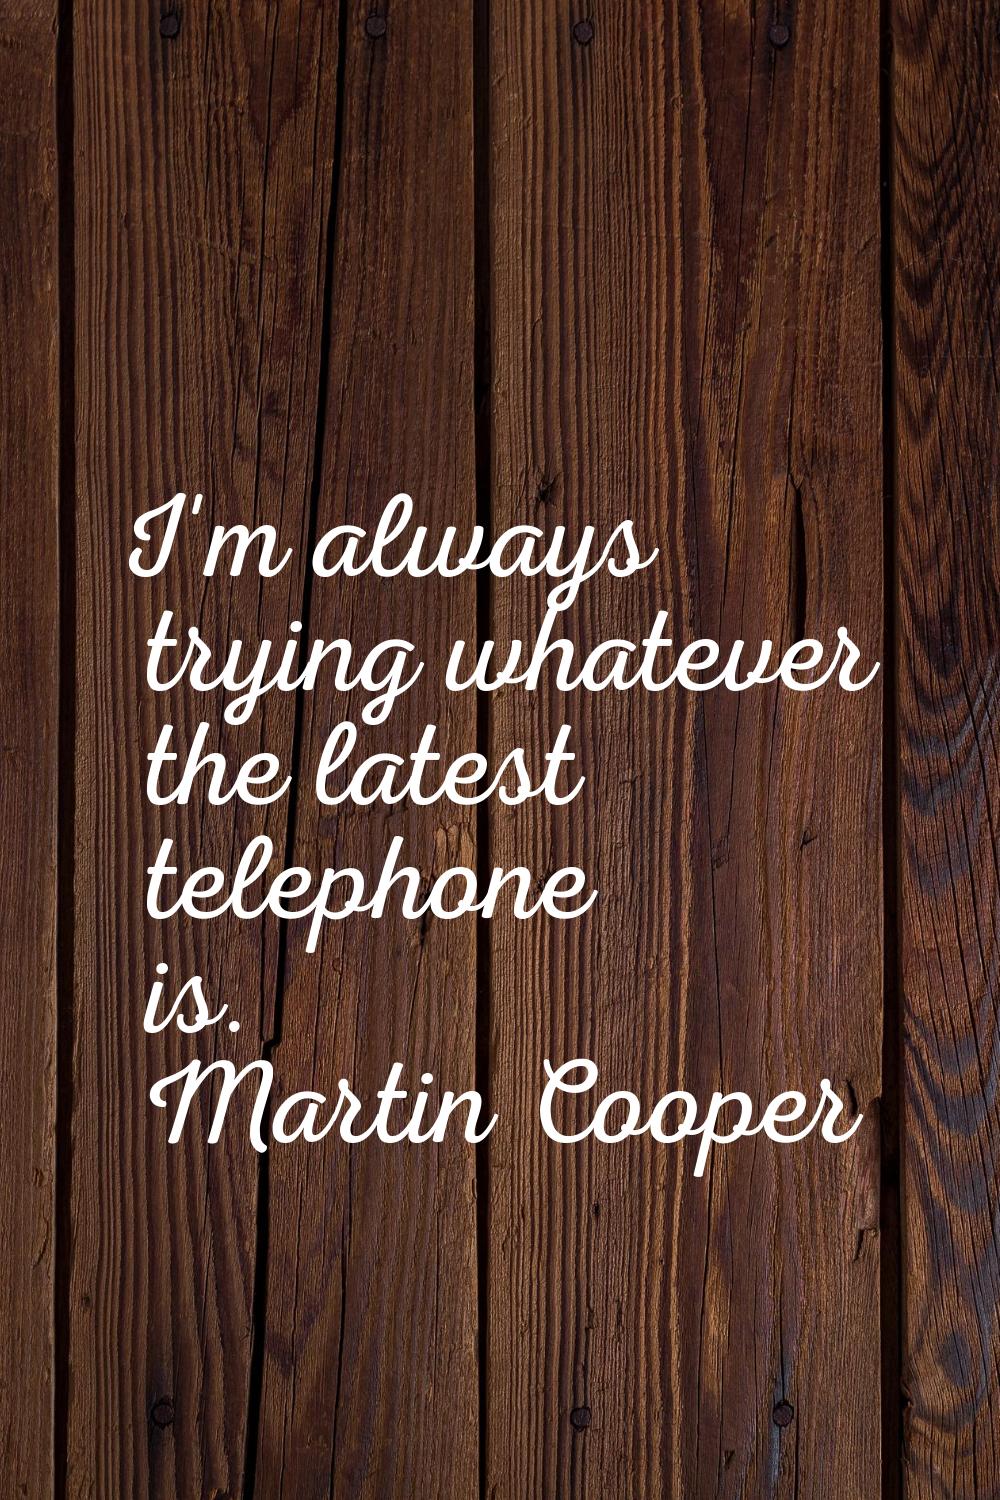 I'm always trying whatever the latest telephone is.